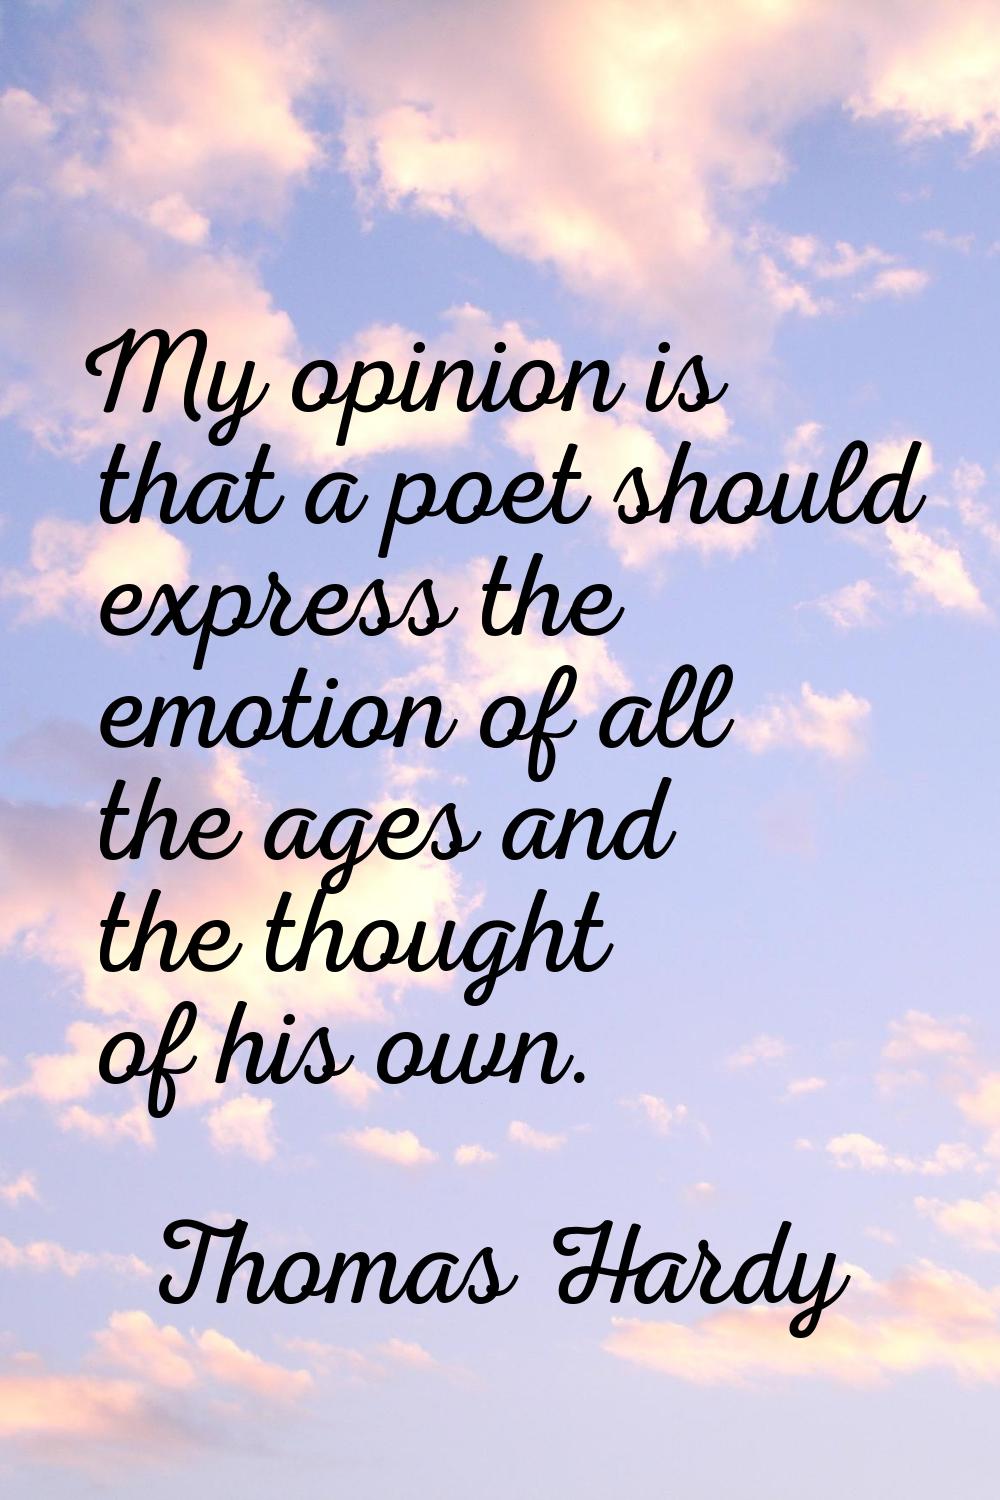 My opinion is that a poet should express the emotion of all the ages and the thought of his own.